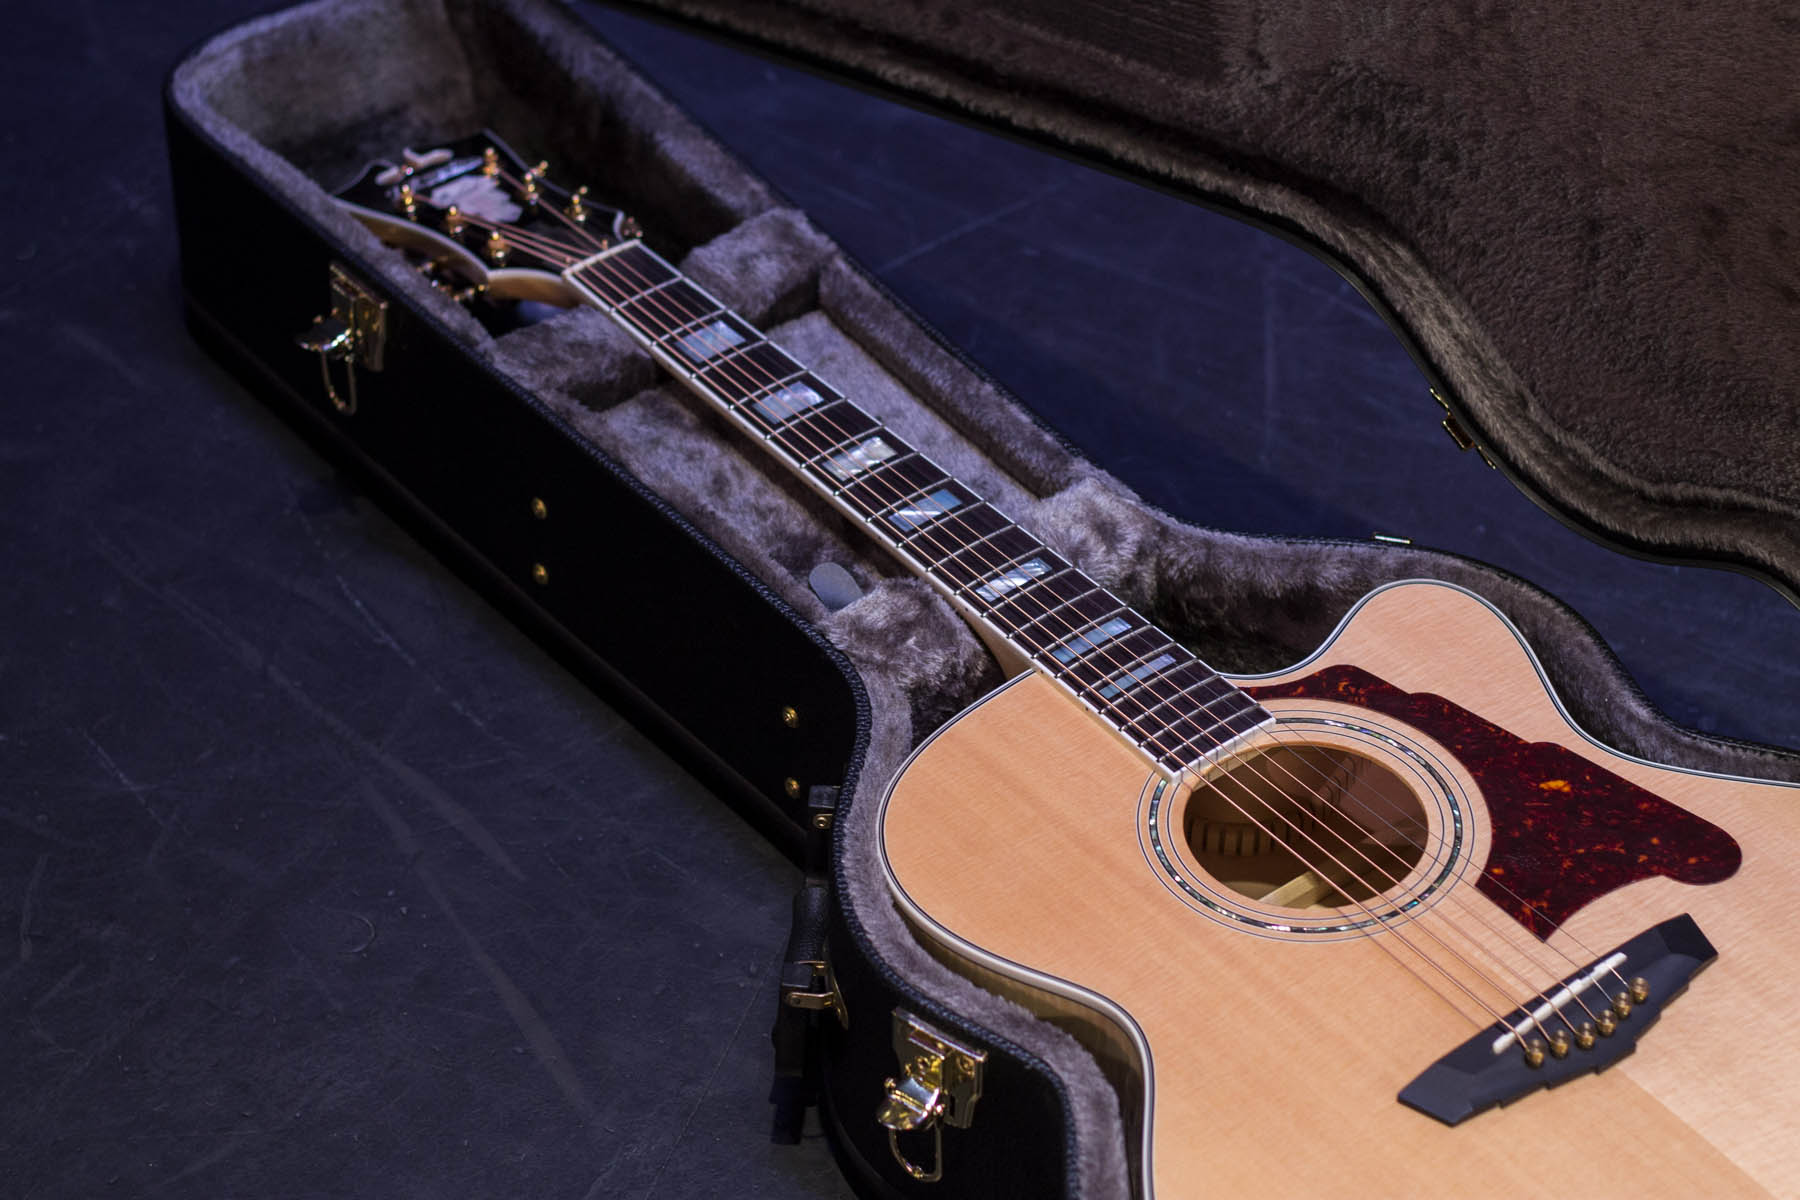 Acoustic guitar in a case.